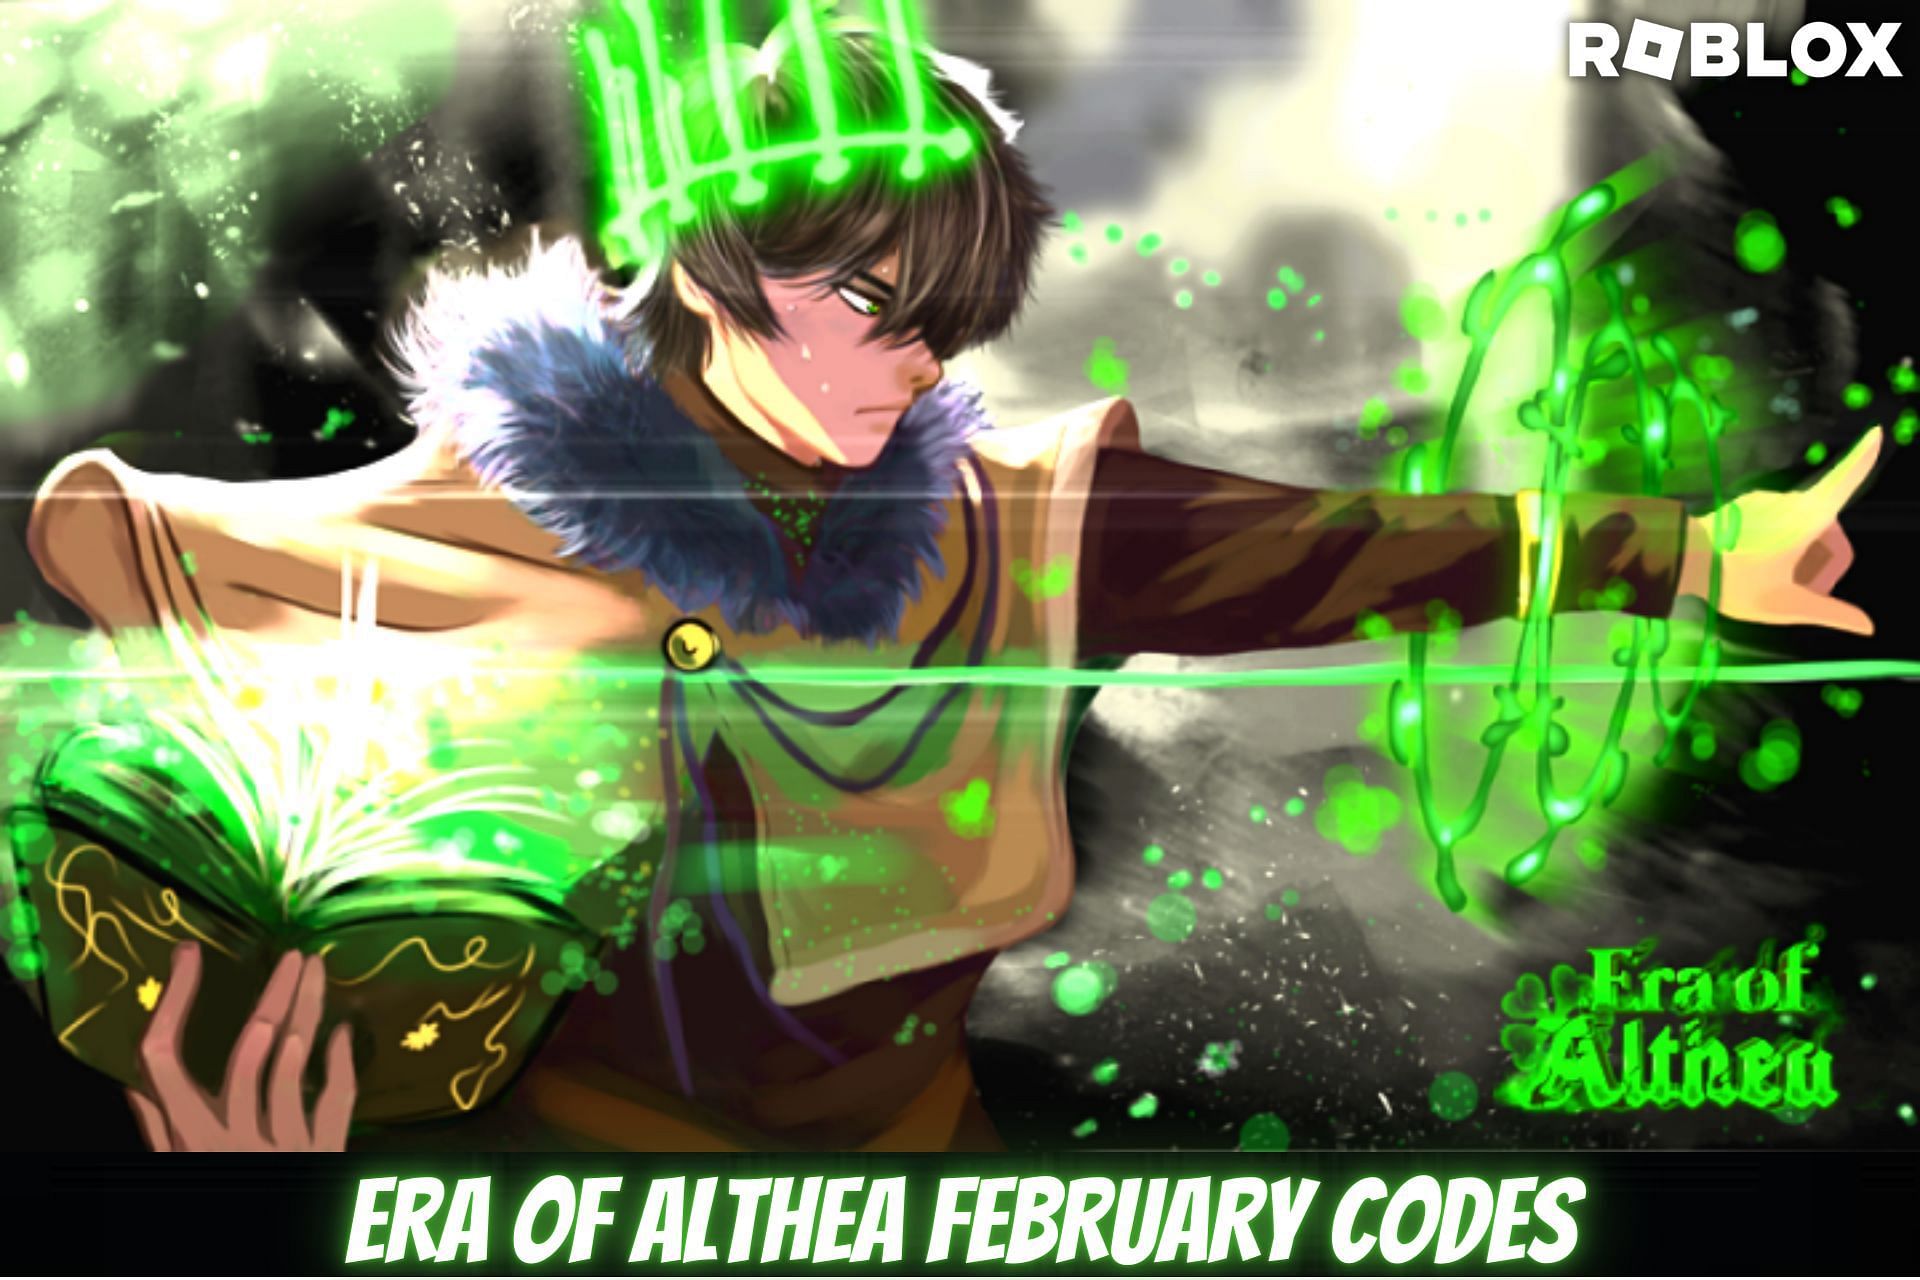 Era of Althea codes – free spins and more